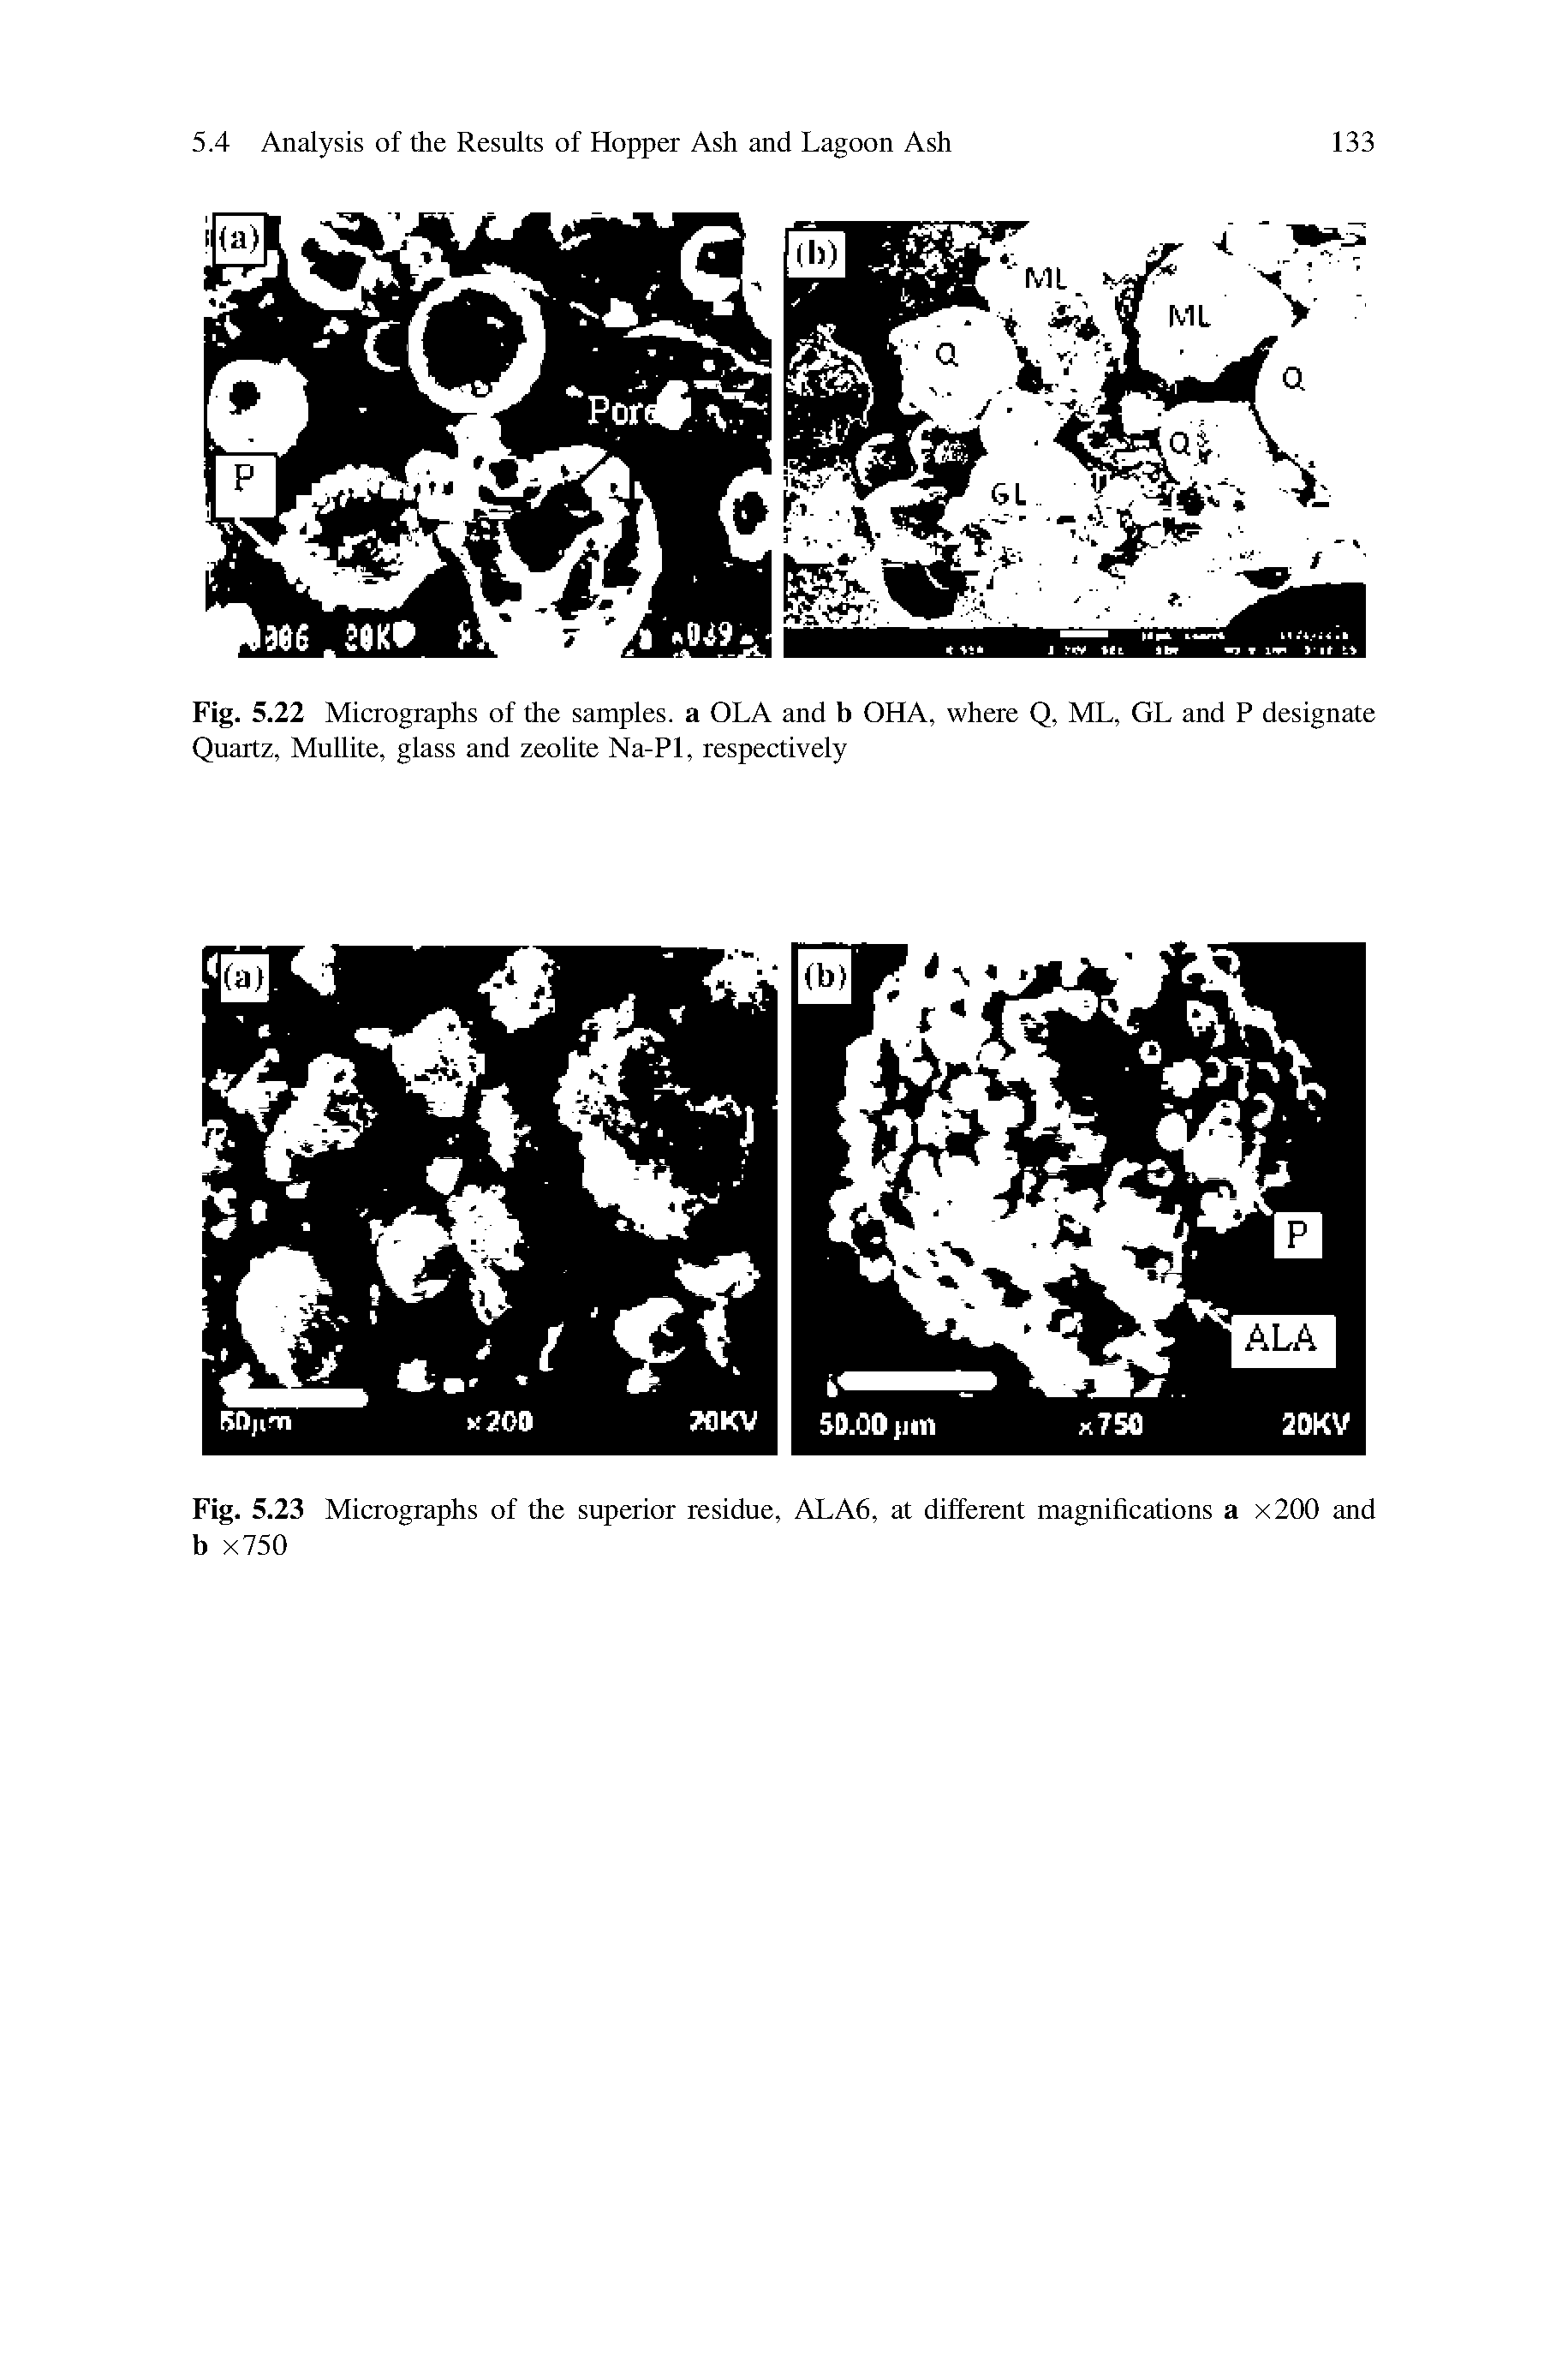 Fig. 5.22 Micrographs of the samples, a OLA and b OHA, where Q, ML, GL and P designate Quartz, Mullite, glass and zeolite Na-Pl, respectively...